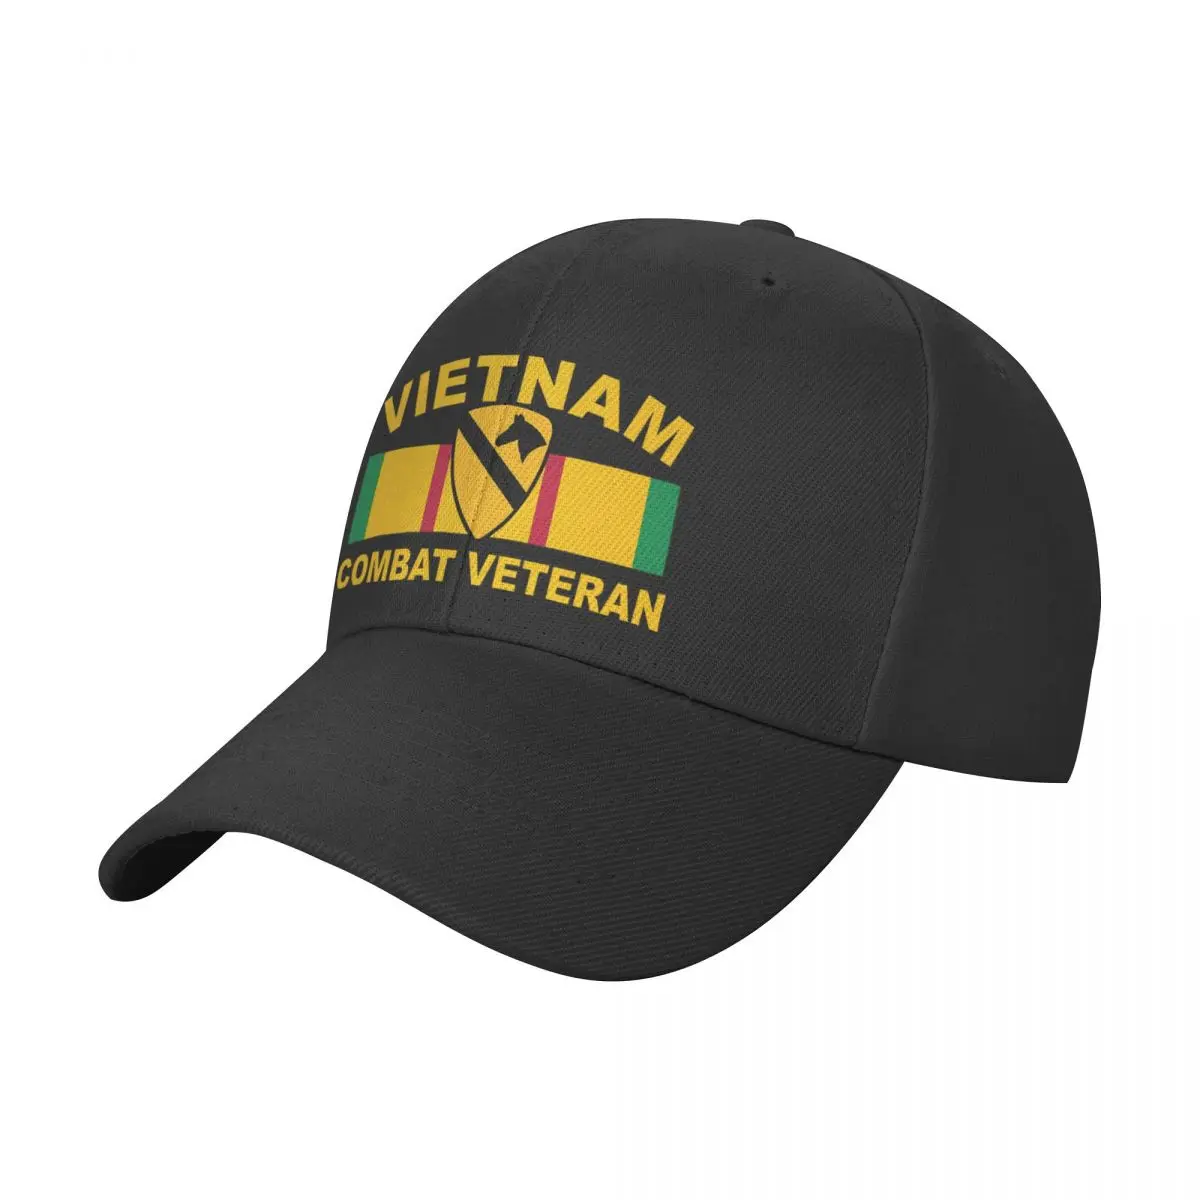 

Us Army 1st Cavalry Division Vietnam Combat Veteran Casual Baseball Cap for Women and Men Fashion Hat Hard Top Caps Snapback Hat